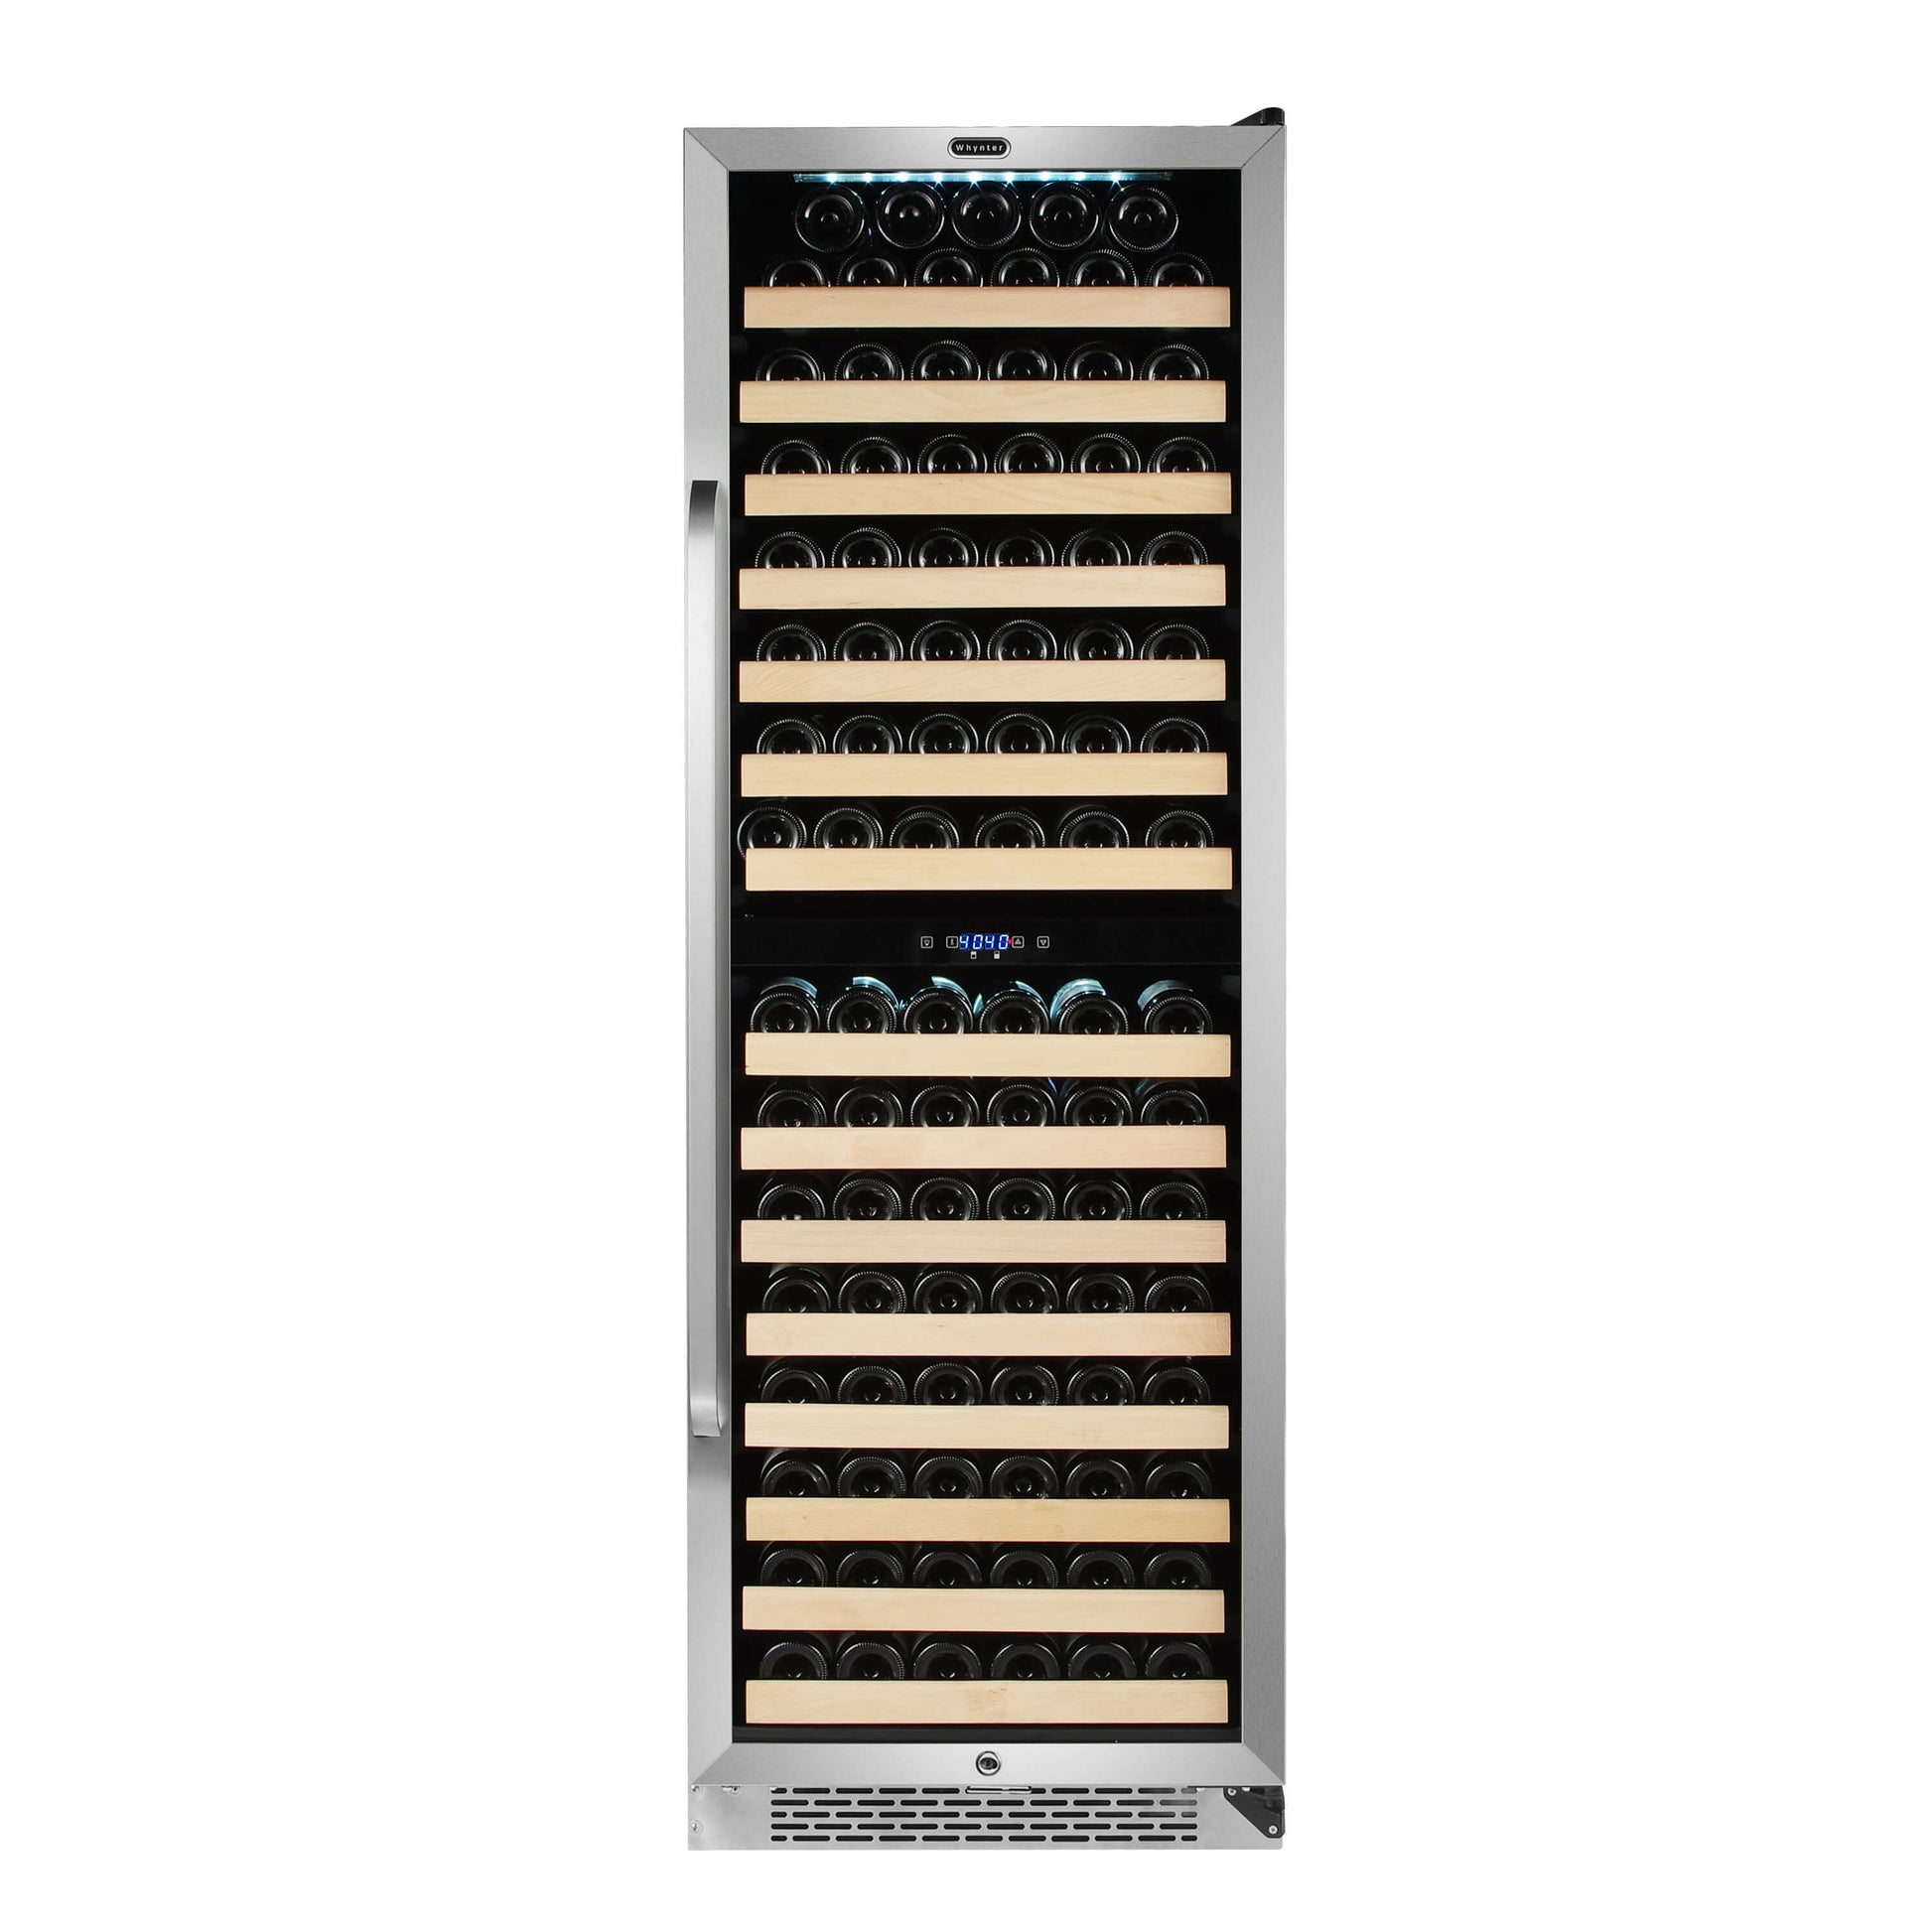 Whynter Wine Refrigerator Whynter BWR-1642DZ/BWR-1642DZa 164 Bottle Built-in Stainless Steel Dual Zone Compressor Wine Refrigerator with Display Rack and LED display